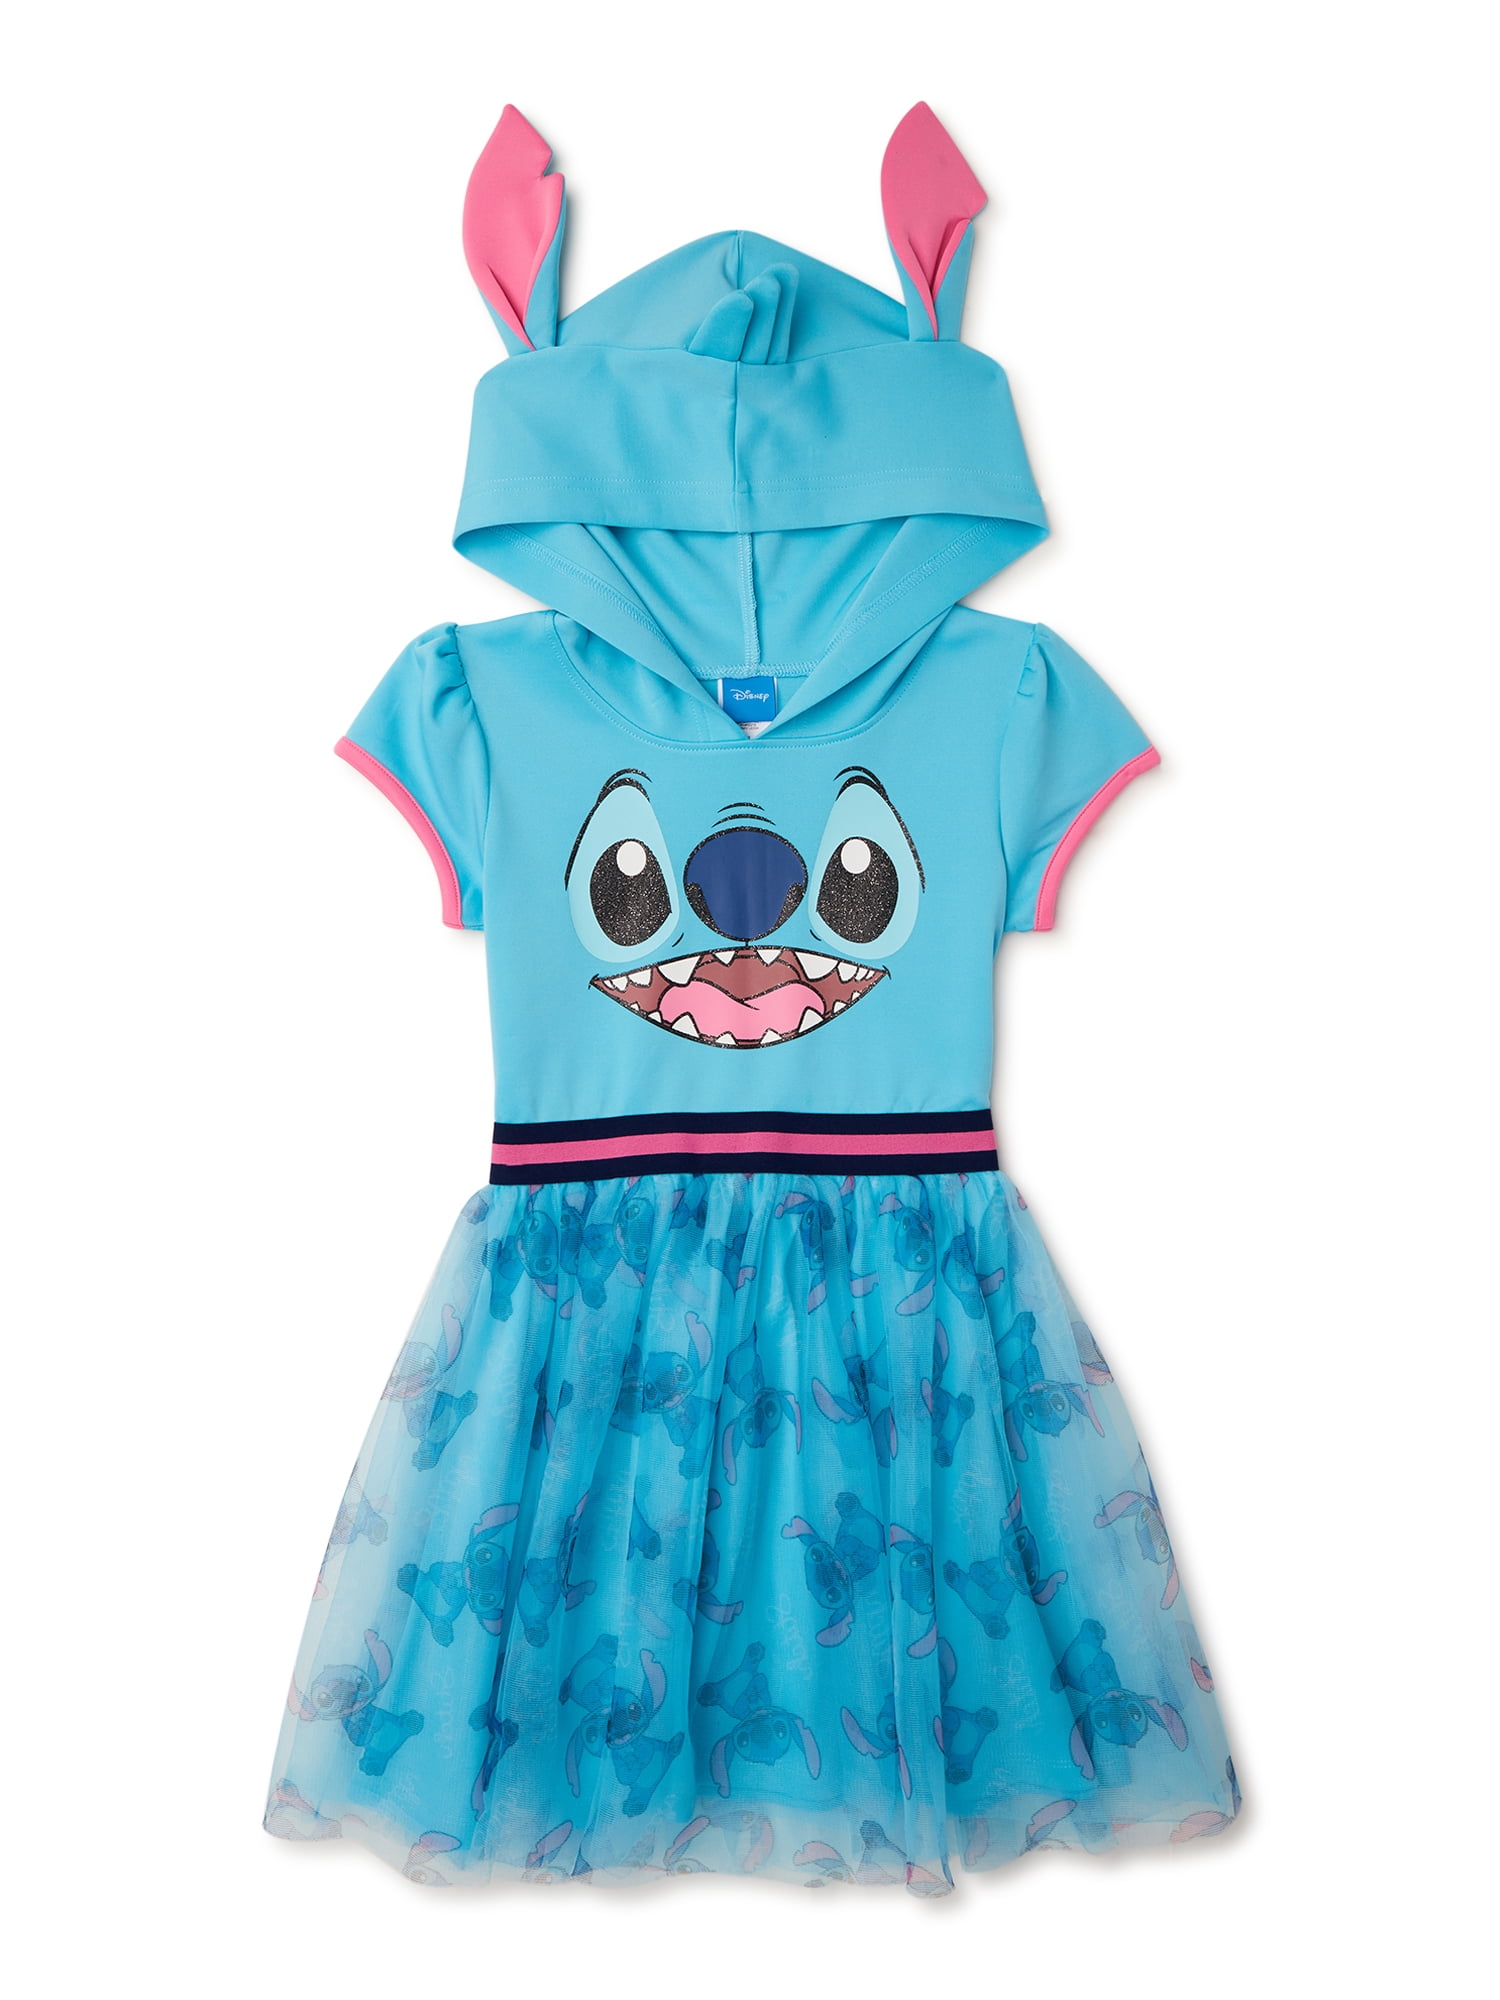 Disney stitch Adventure Dress Outfit Girls and similar items